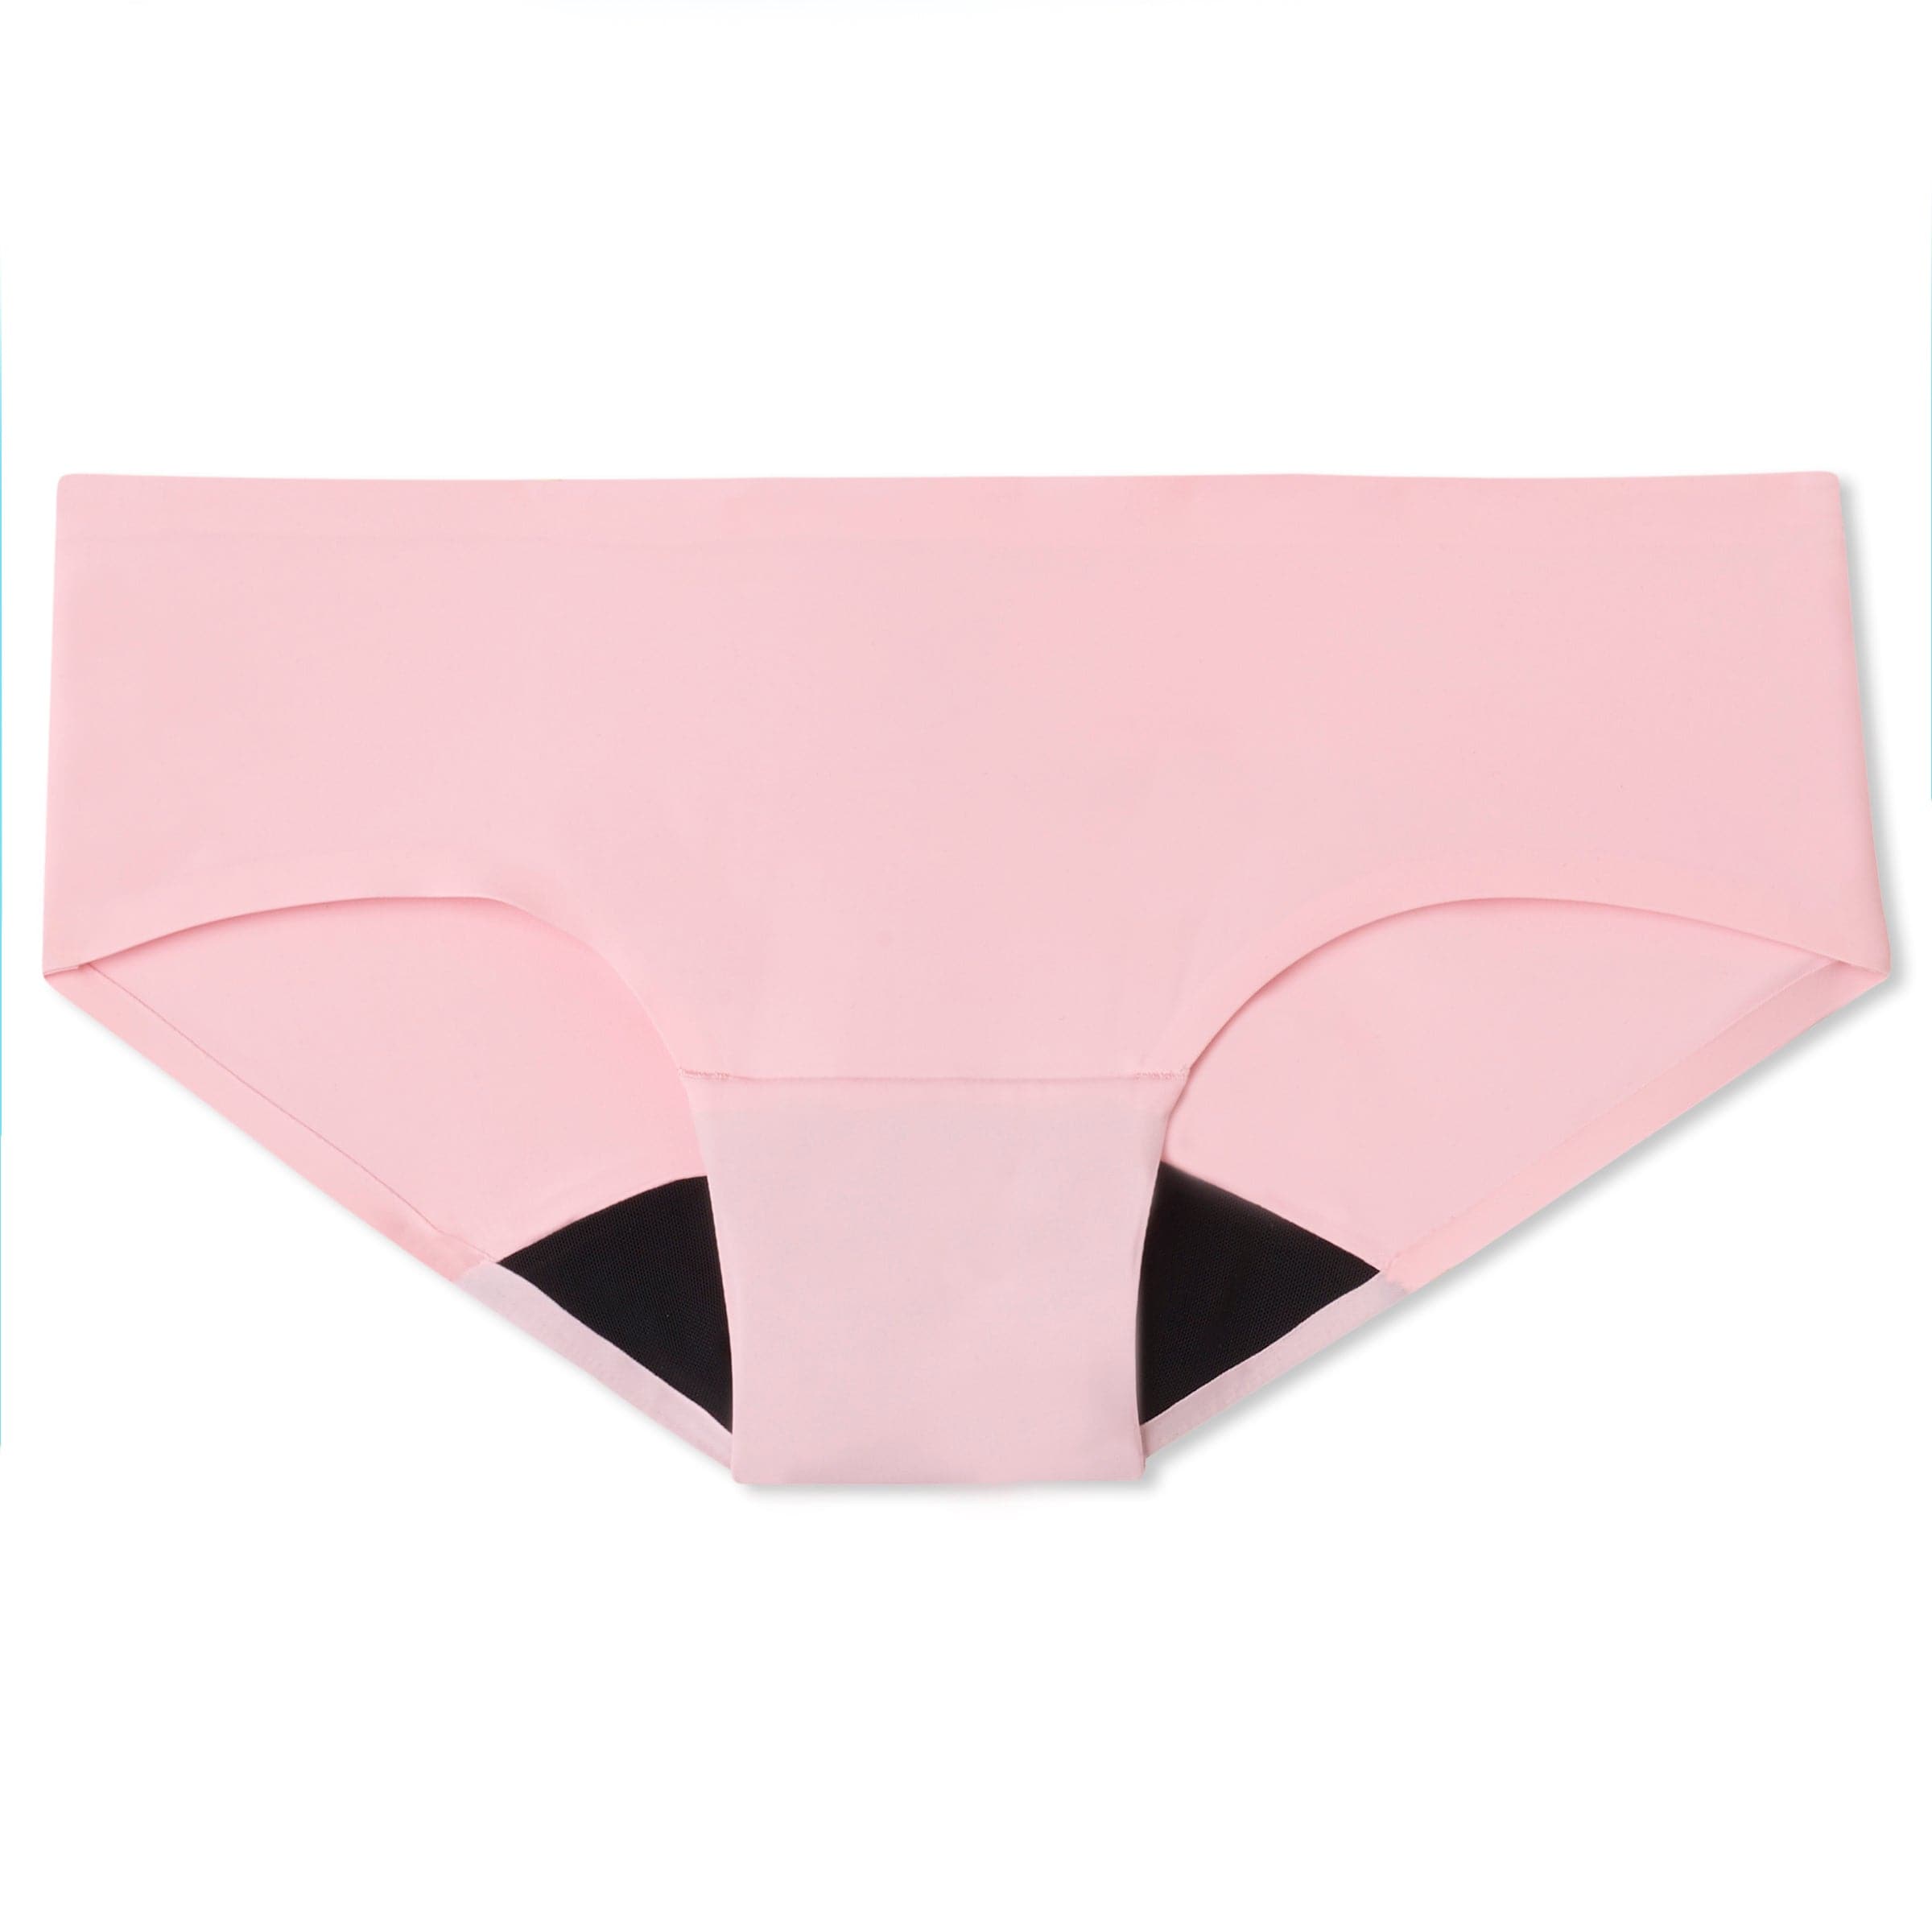 Menstrual teenage panties BNB Teens Powder briefs with a standard gusset -  buy with delivery all over Ukraine - the best prices for BNB Protection  Underwear in the online store of menstrual